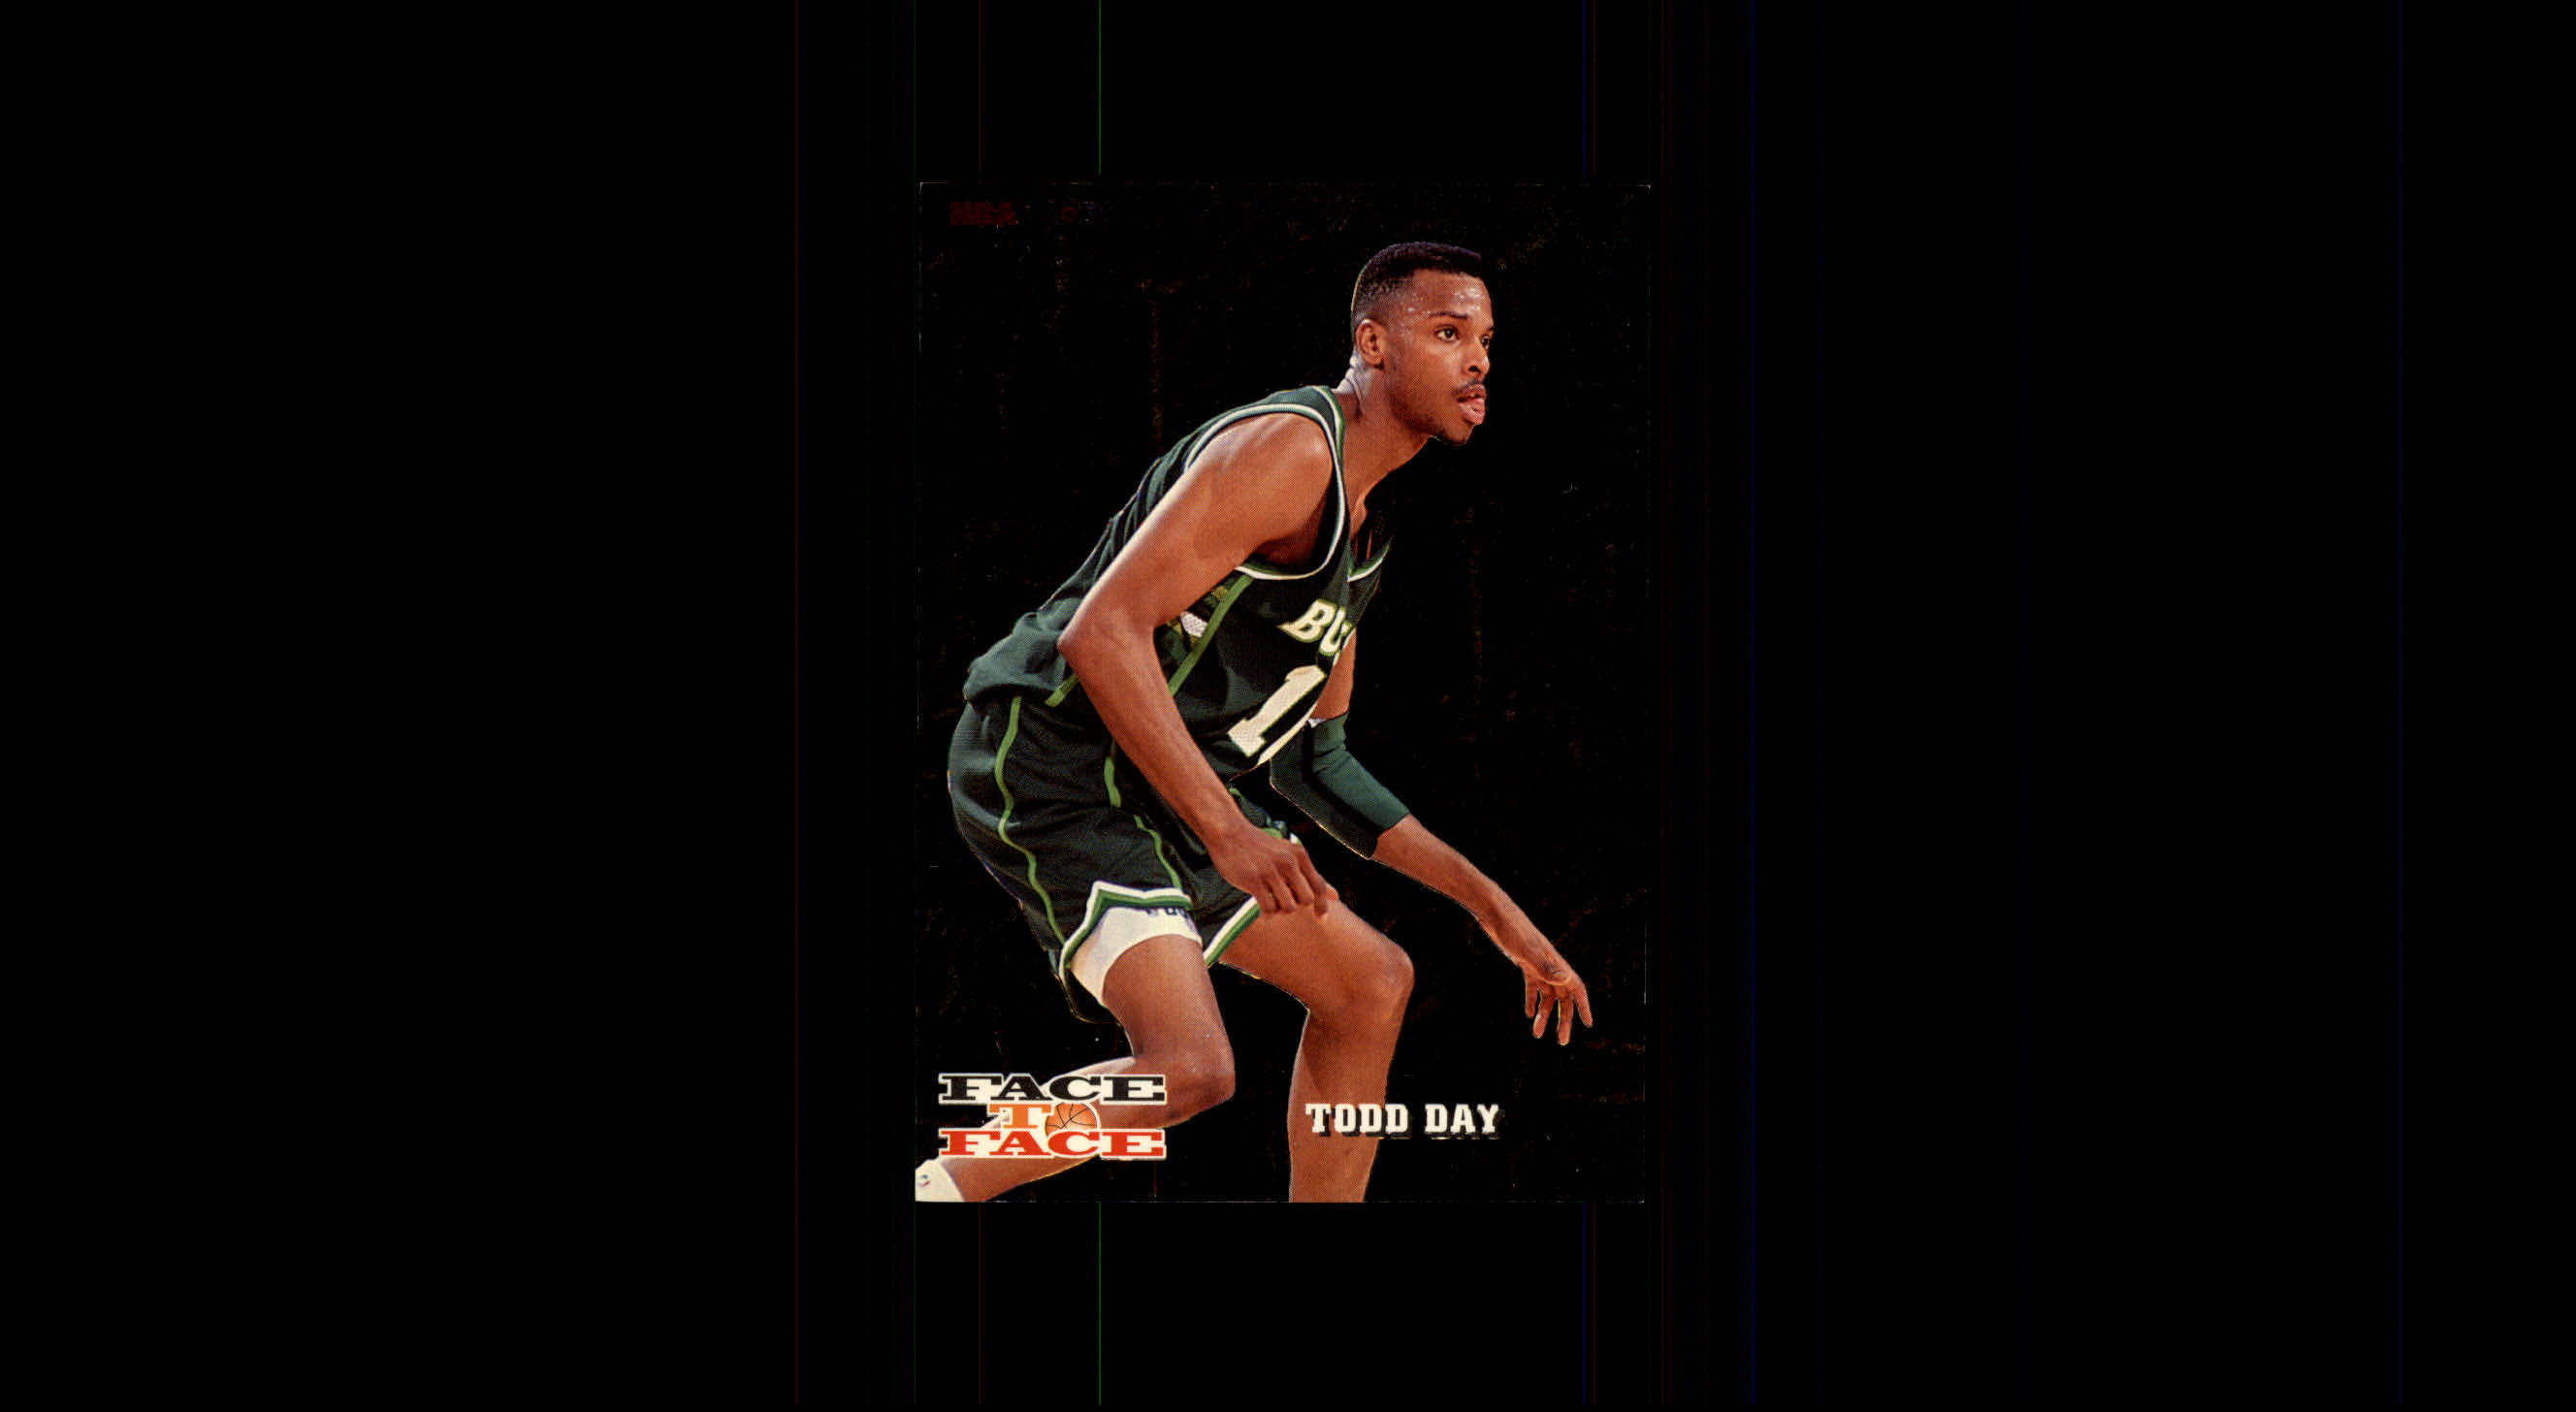 1993-94 Hoops Face to Face #11 Todd Day/Chris Mullin